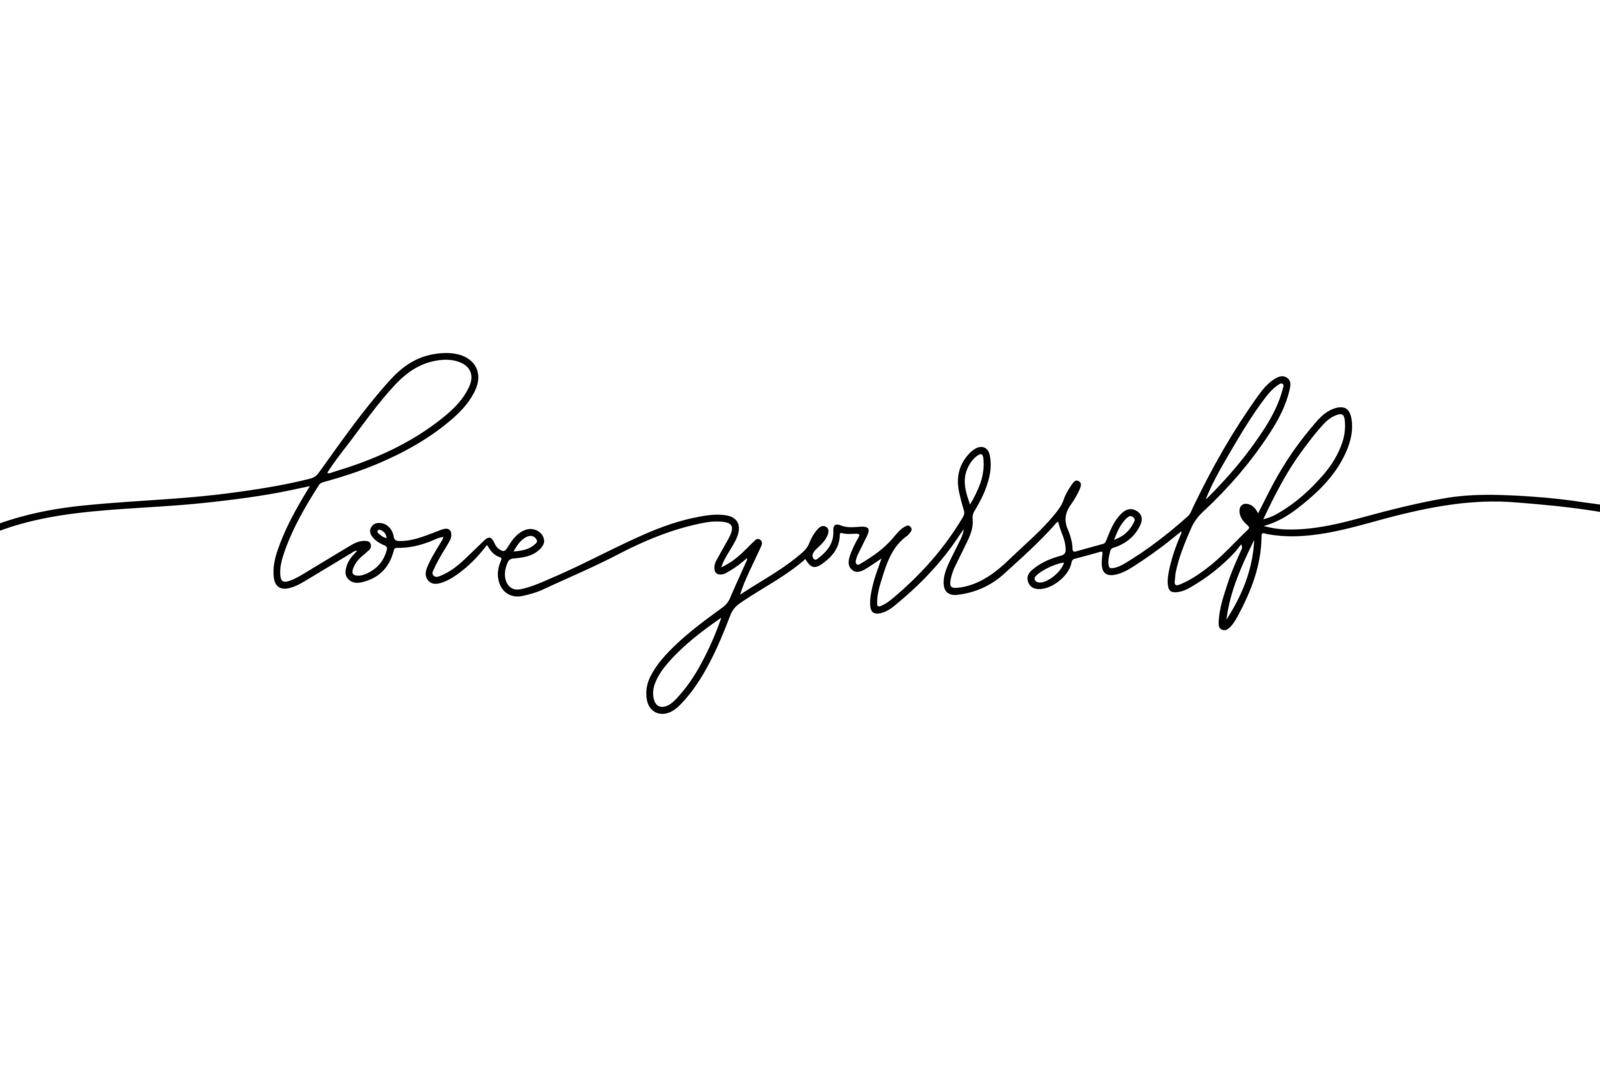 Love Yourself Creative Hand drawn Calligraphy template for t-shirt or print designs. Motivational Quote Lettering. Vector illustration